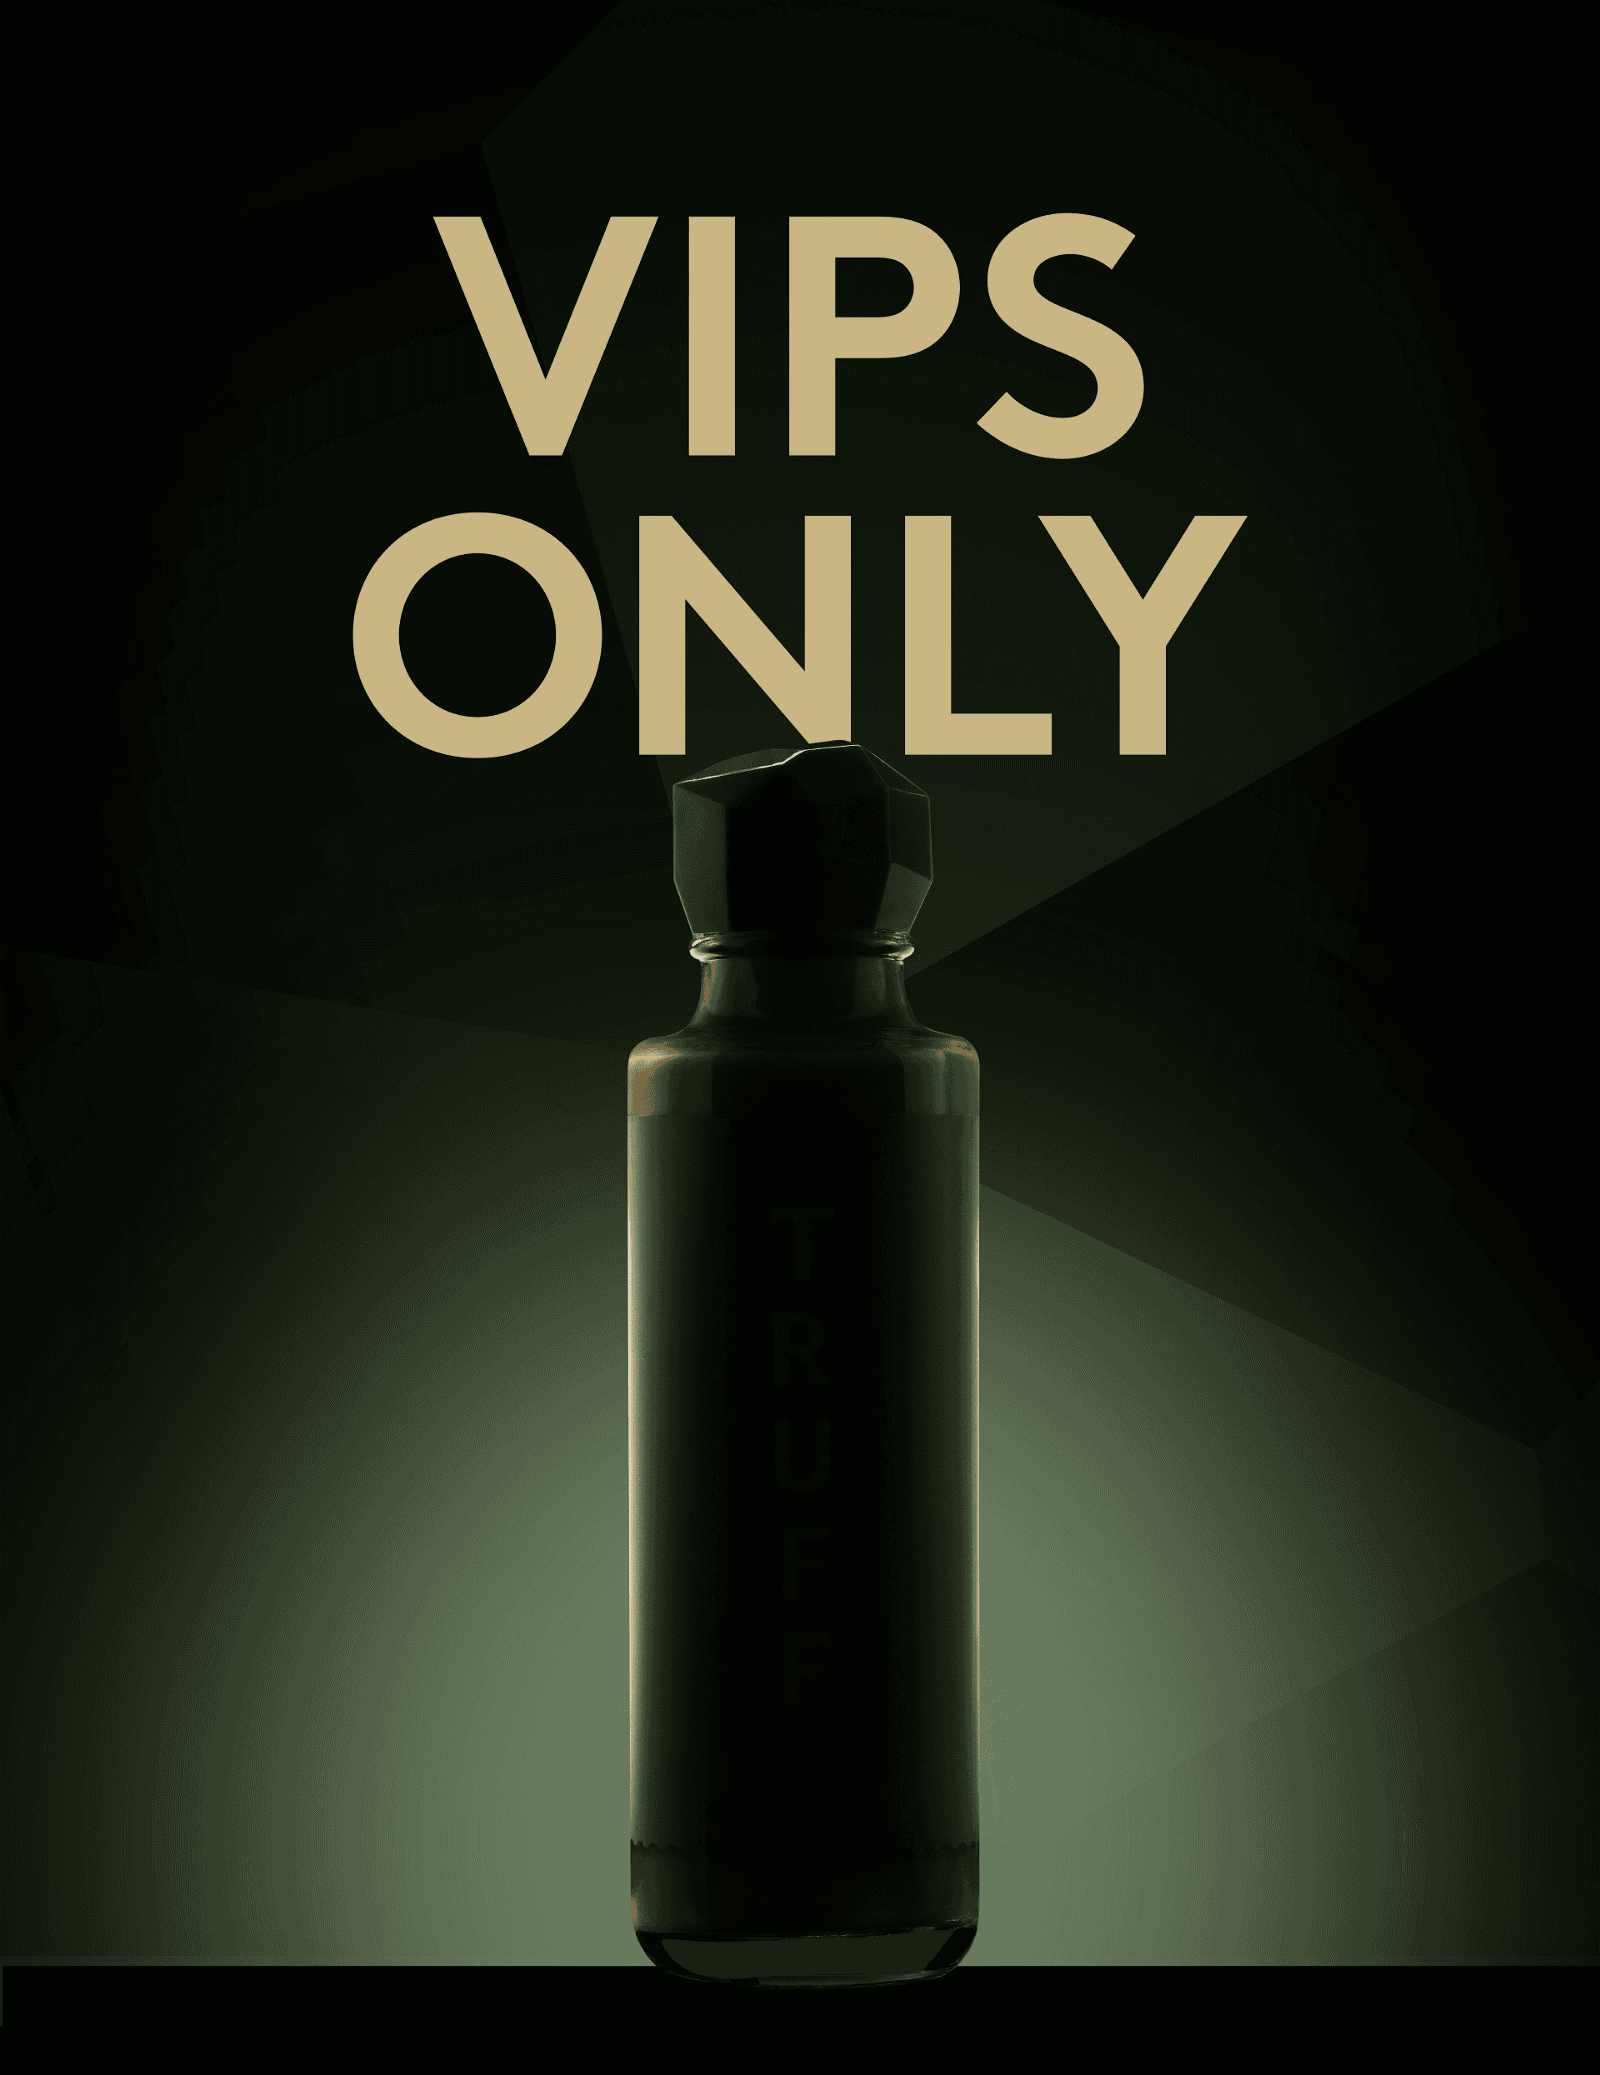 VIPs Only